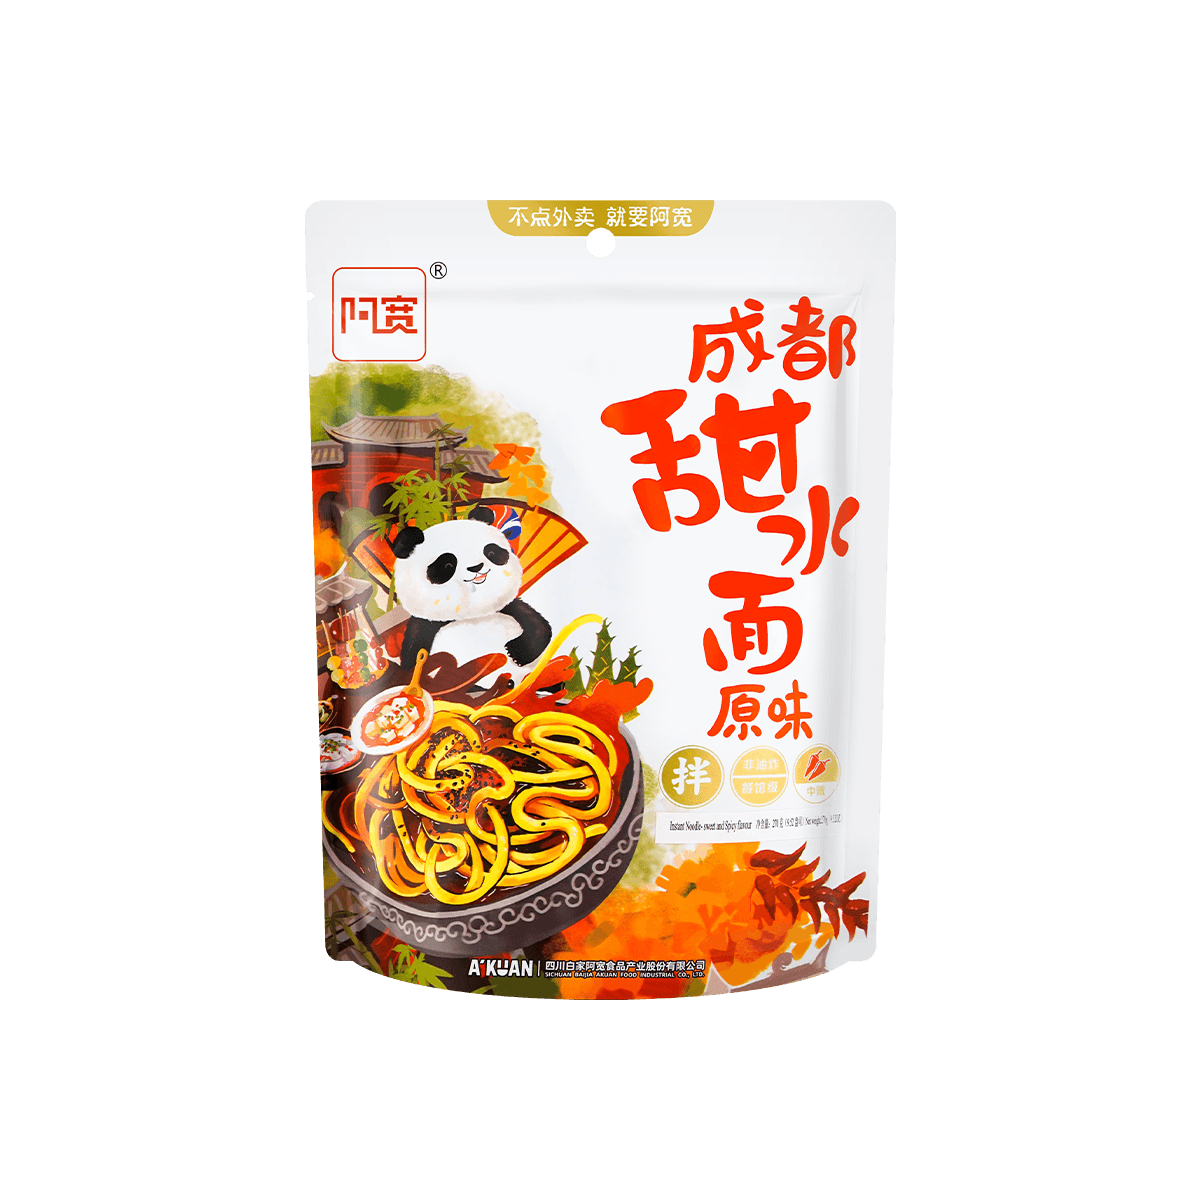 Yamibuy.com:Customer reviews:BJ-A-Kuan Instant Noodle Sweet Spicy 270g